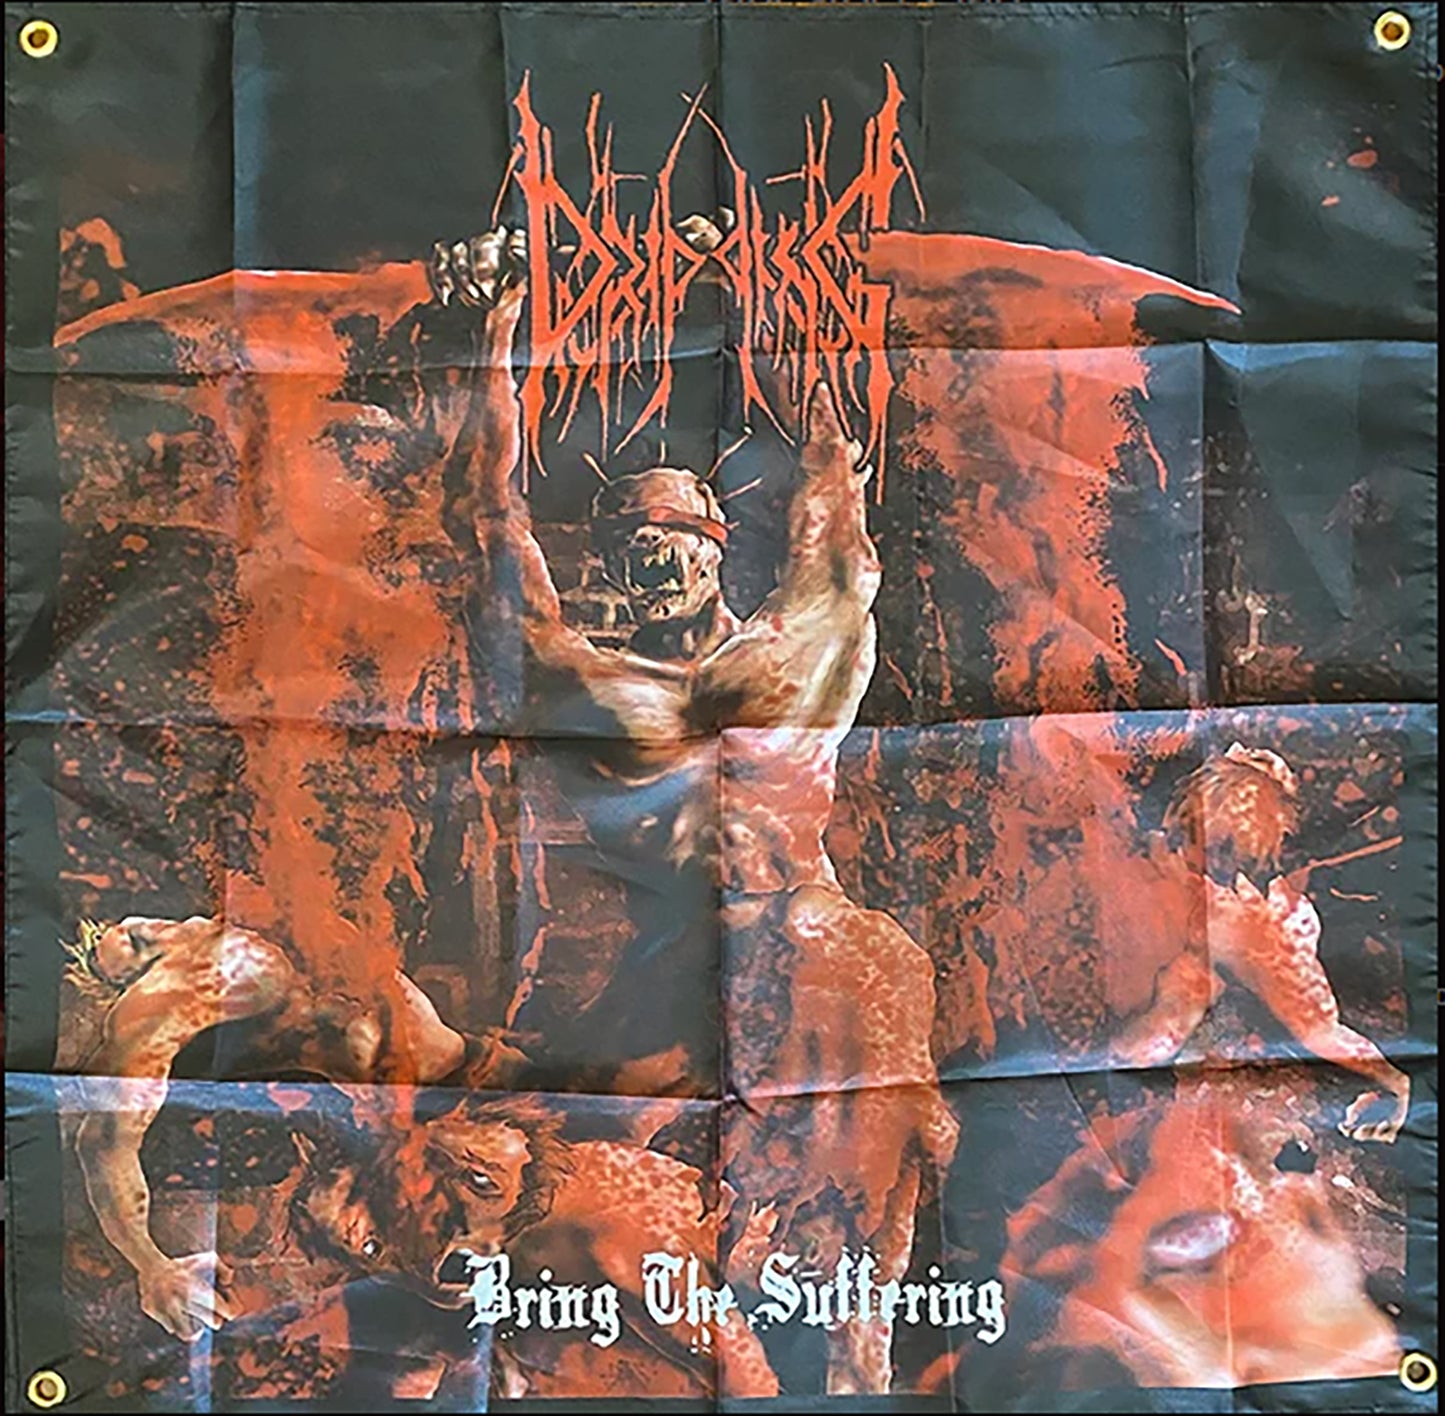 Dripping " Bring The Suffering " Banner / Tapestry / Flag brutal death metal